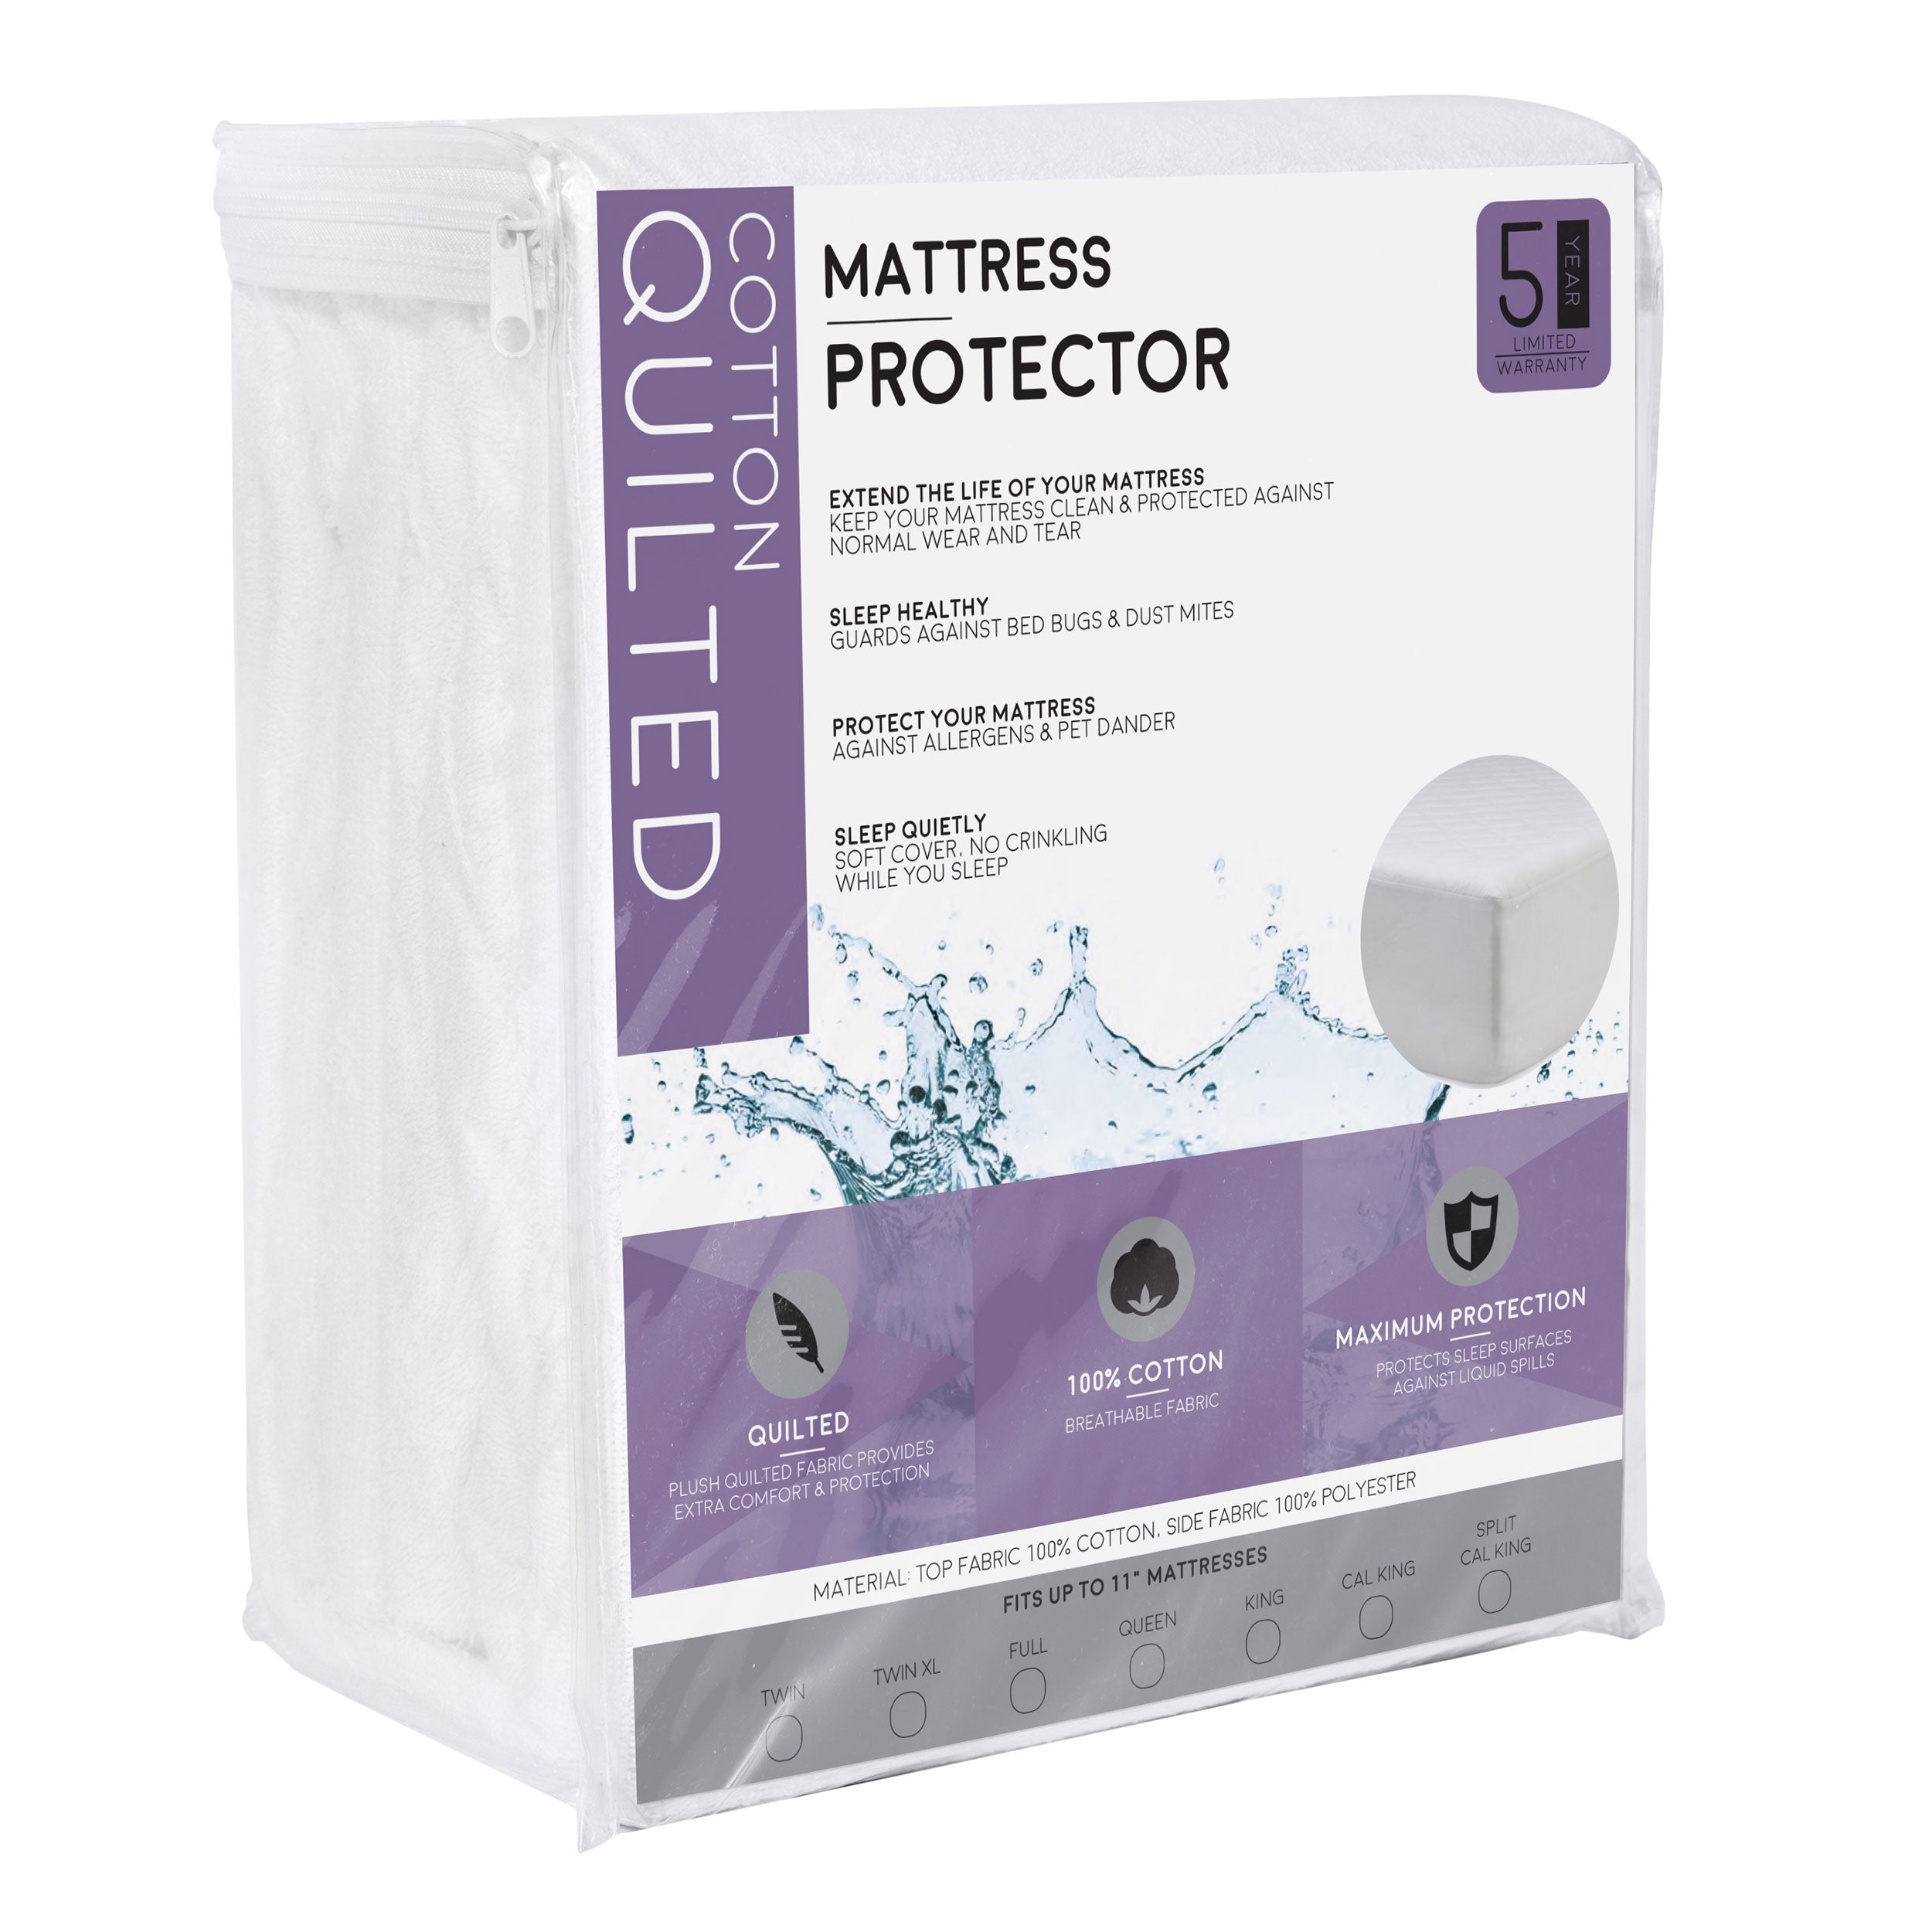 Fitted Quilted 100% Cotton Mattress Protector - 100% Waterproof and Hypoallergenic - BlissfulNights.com